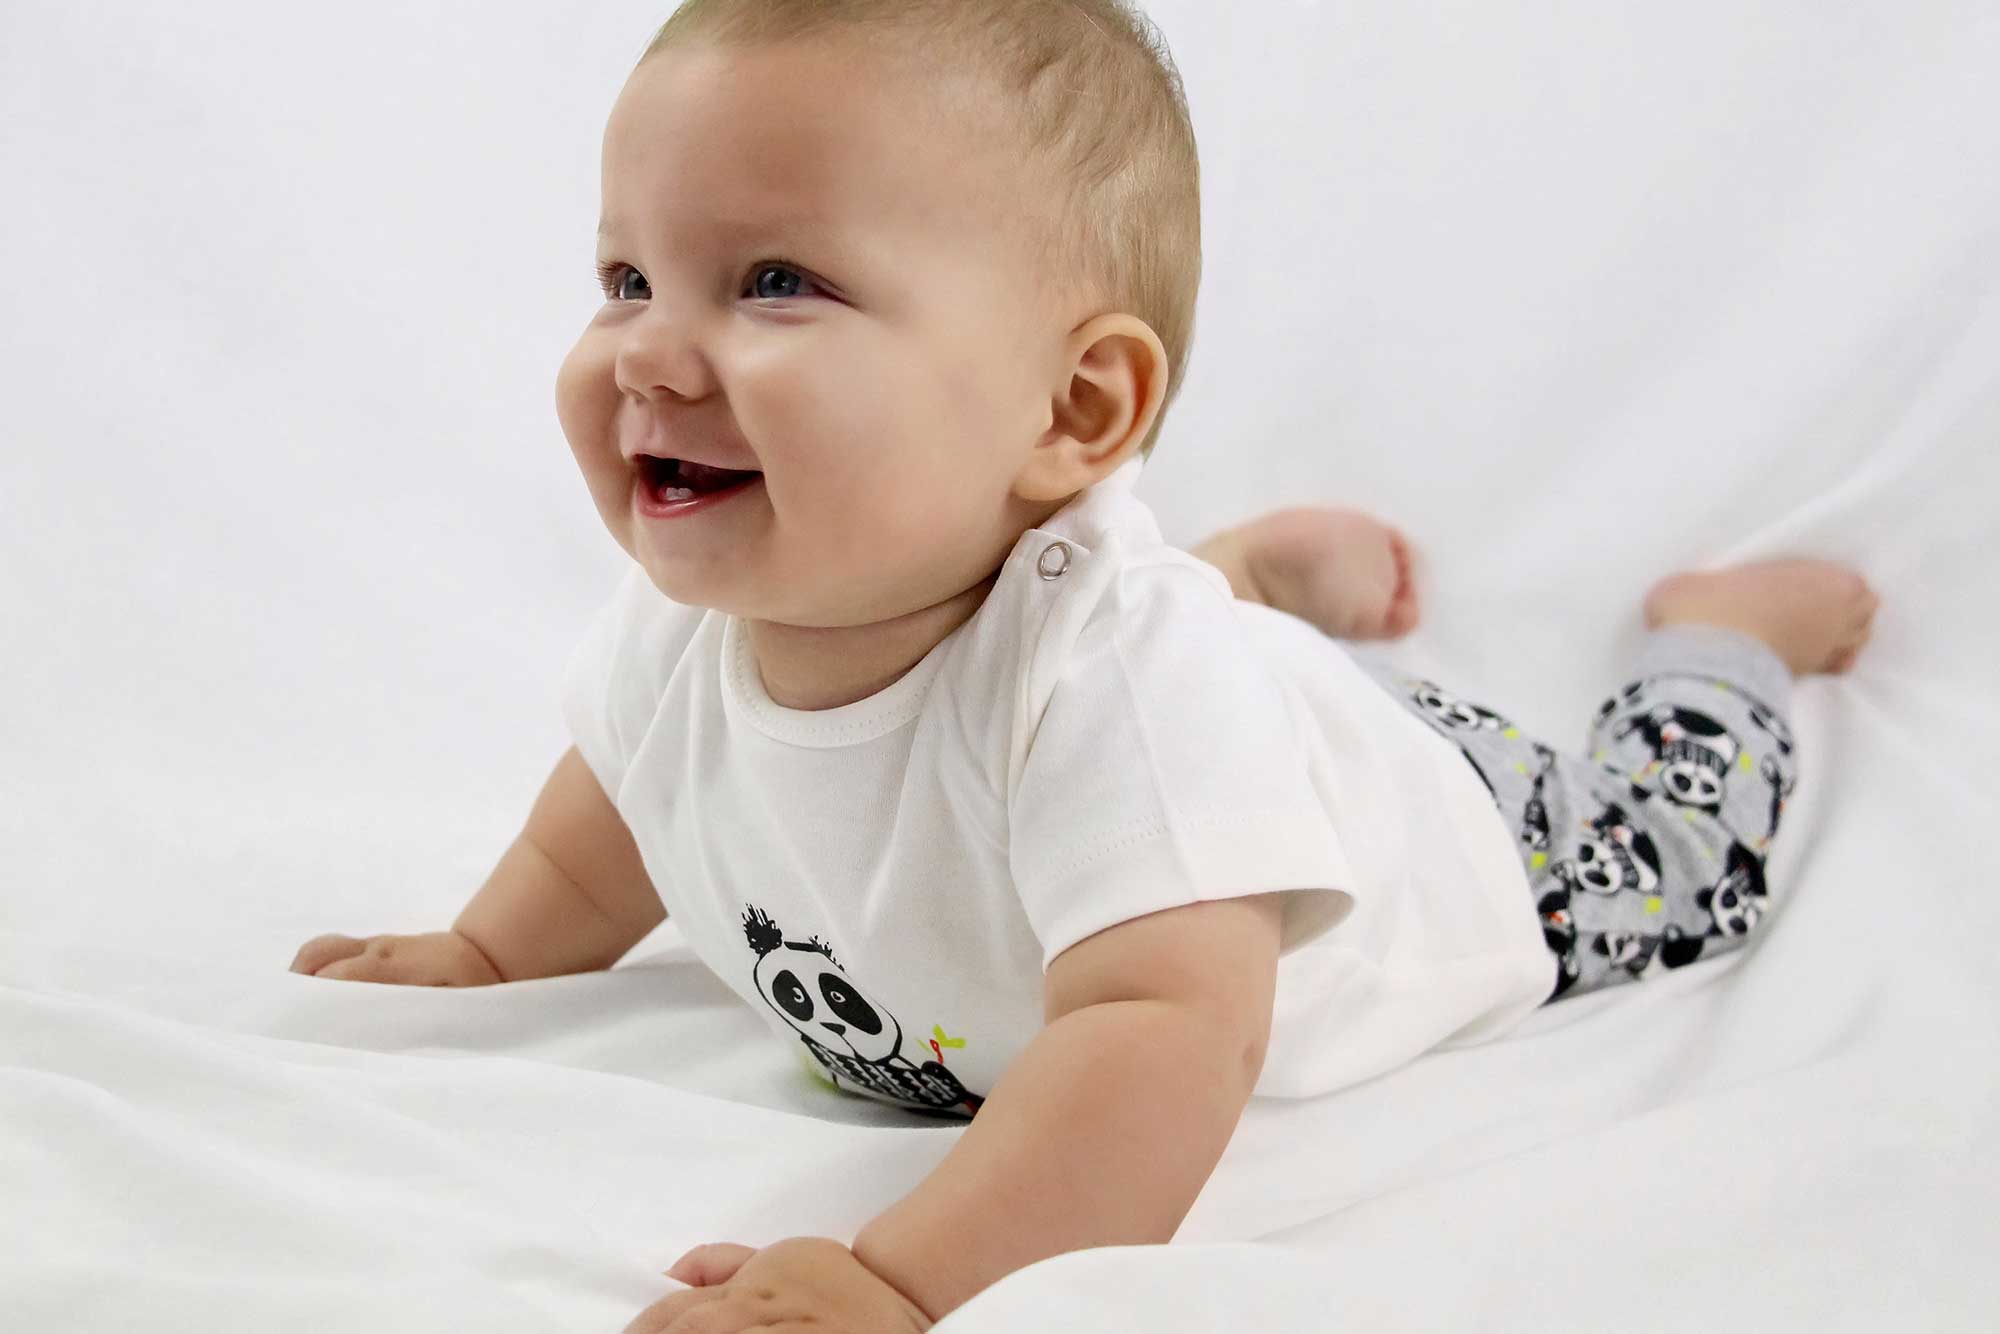 inexpensive baby clothes